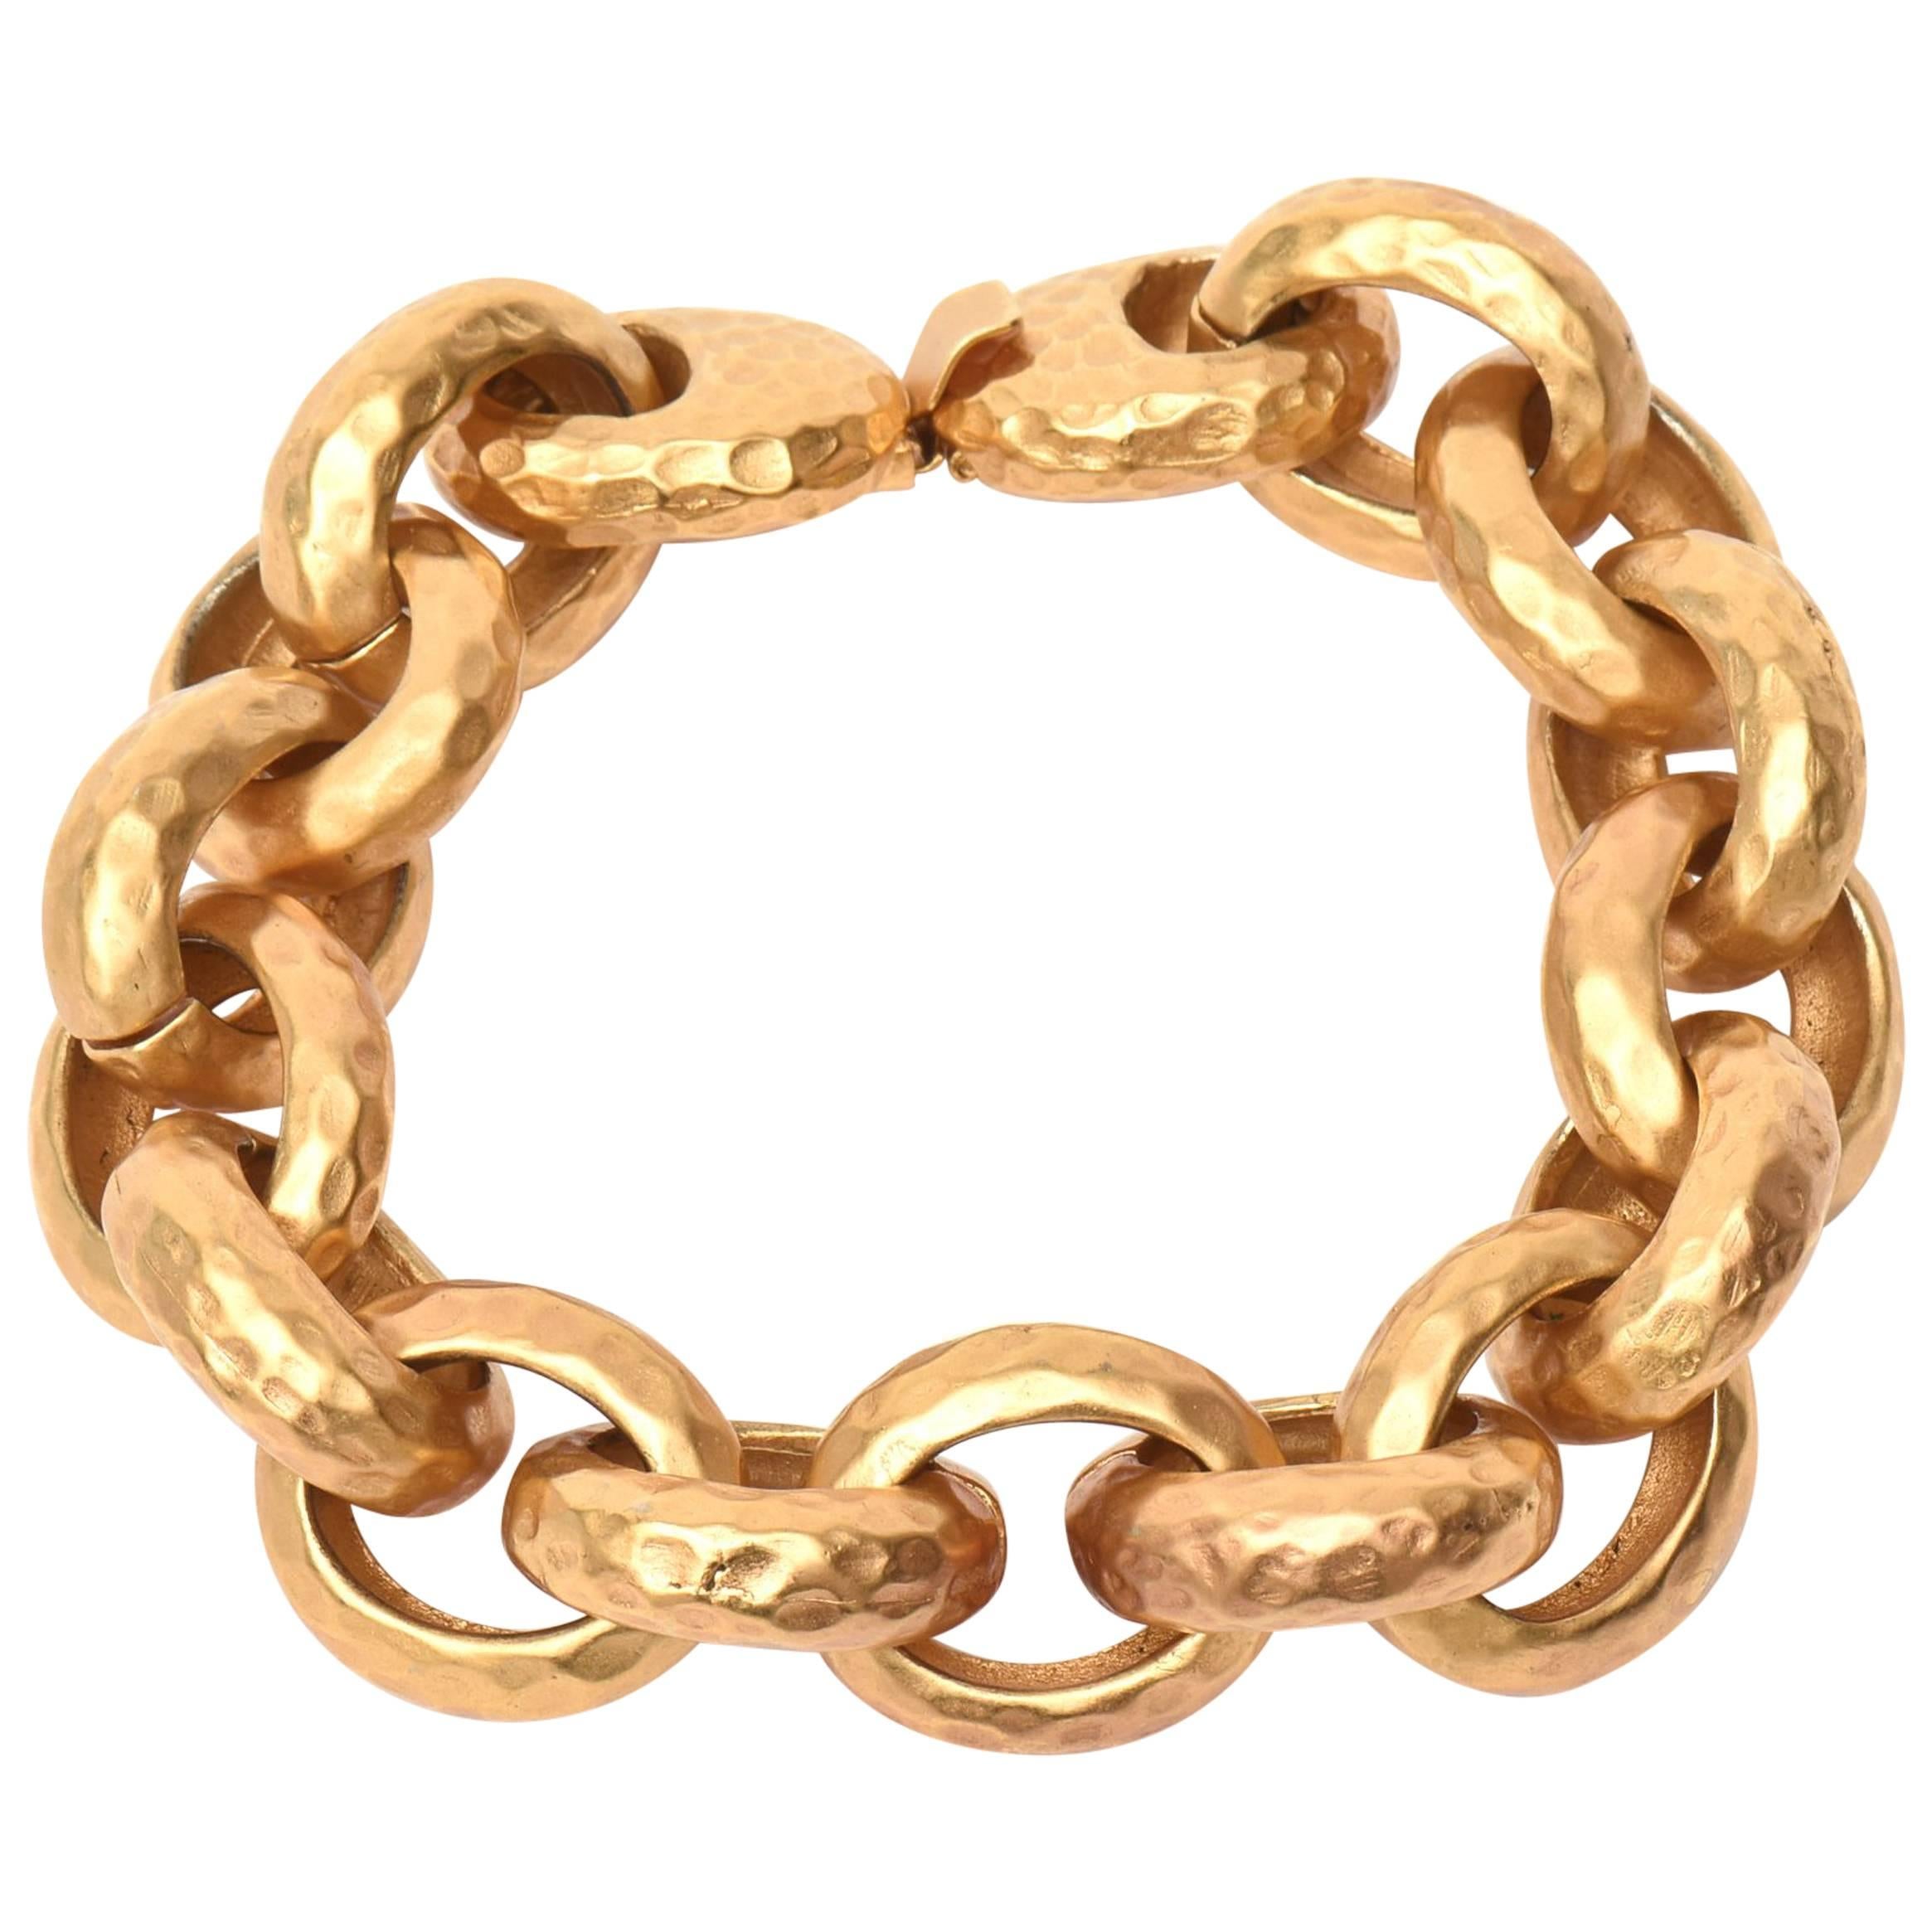 Hand Hammered Gold Plated Link/Chain Bracelet